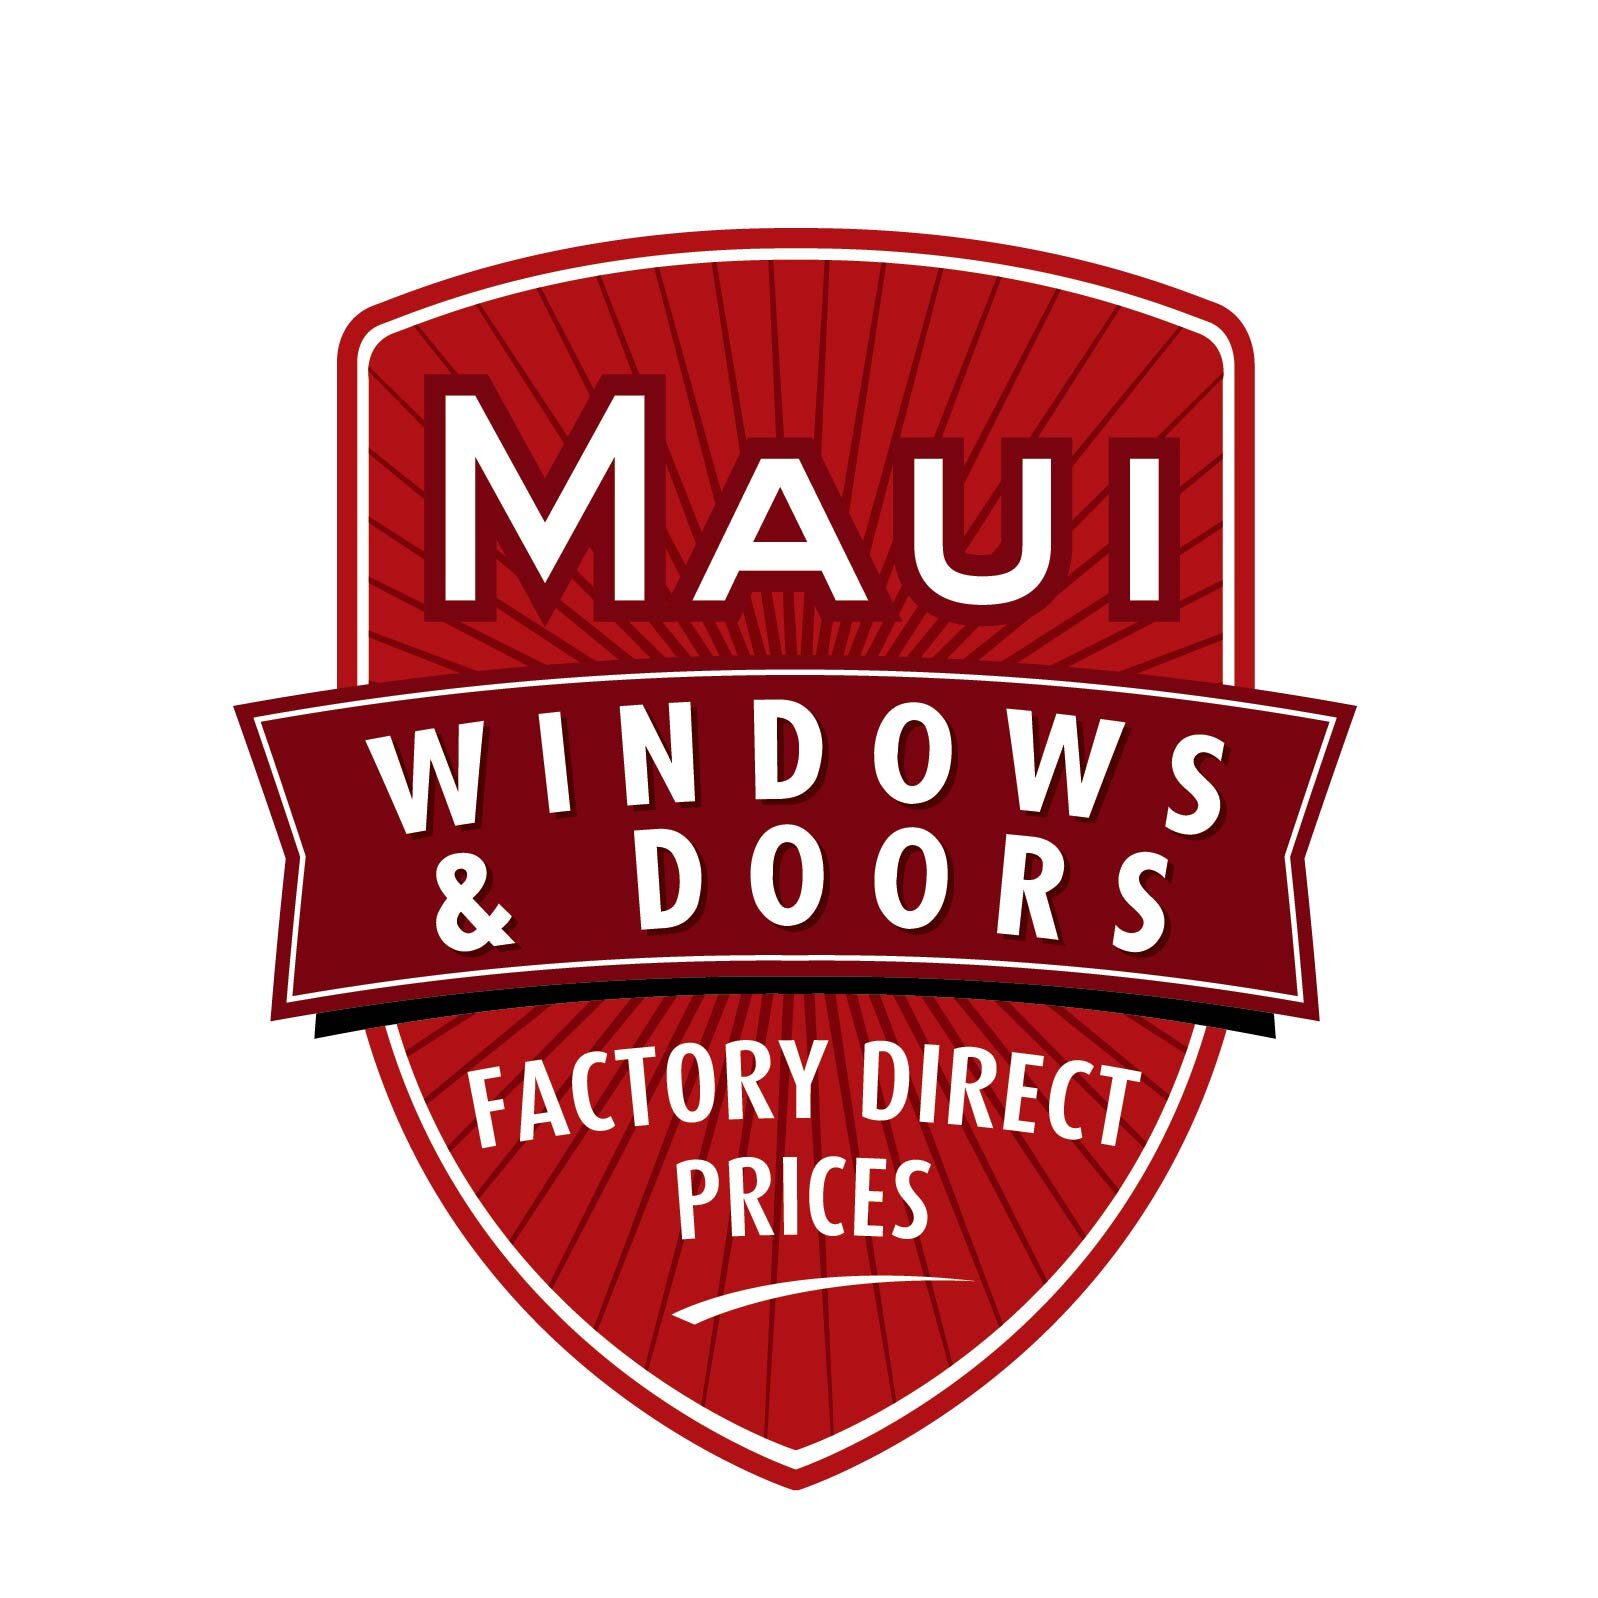 Building Materials and Supply Company, Specializing in Windows and Doors on the island of Maui in Hawaii.